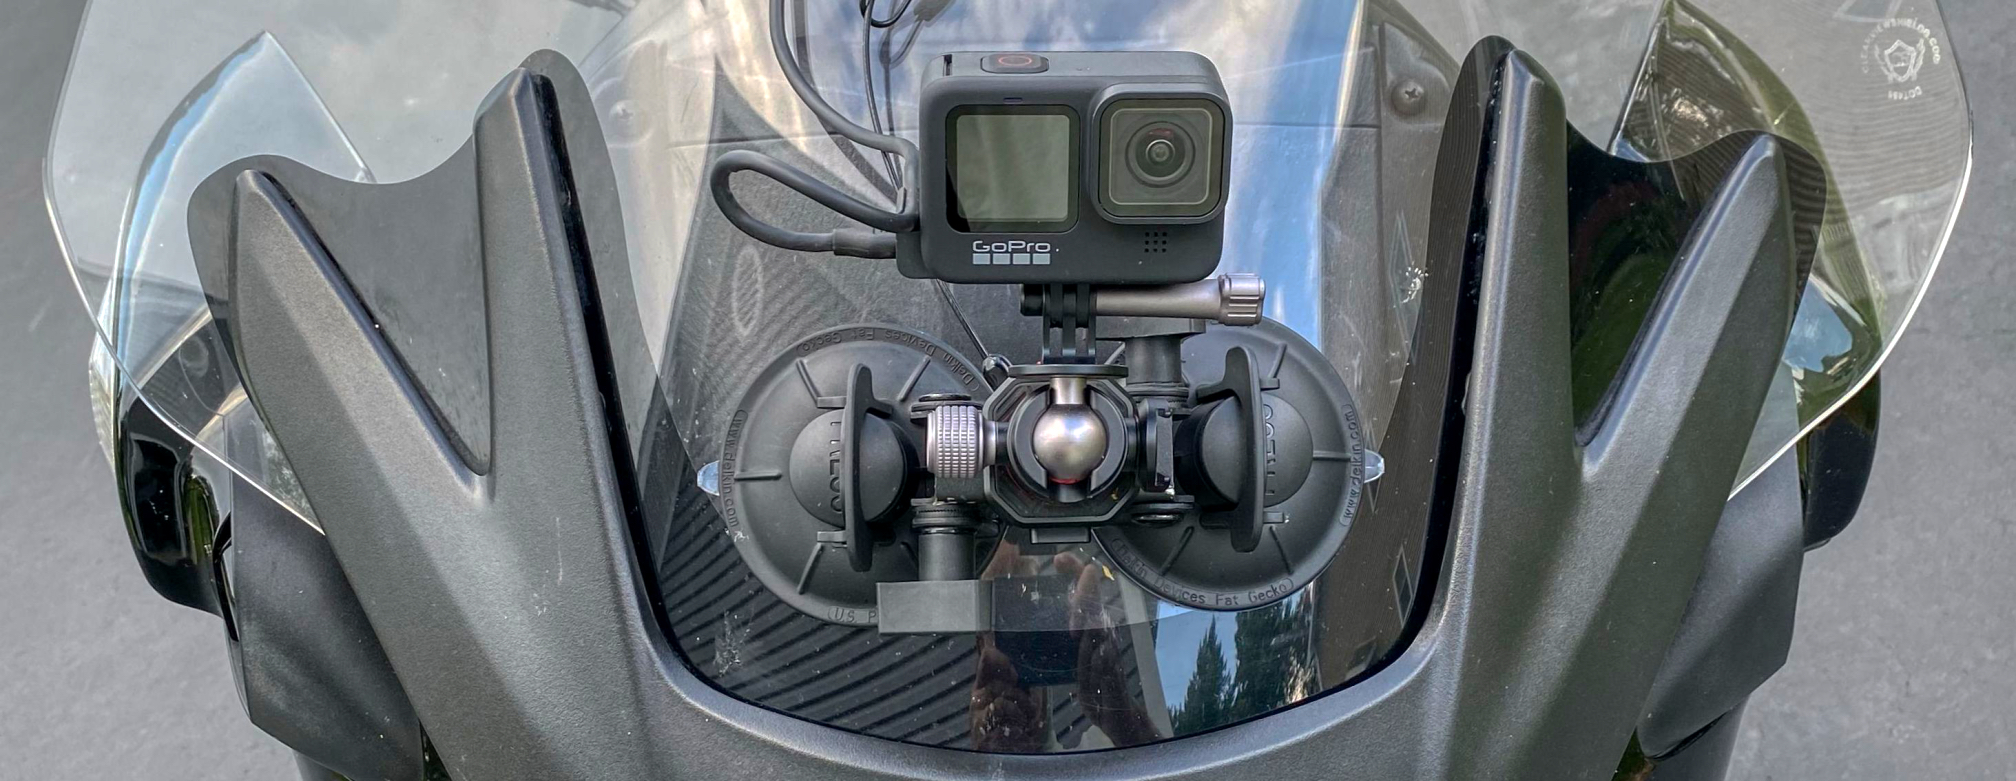 Moto Cameras  Best GoPros for Motorcycles